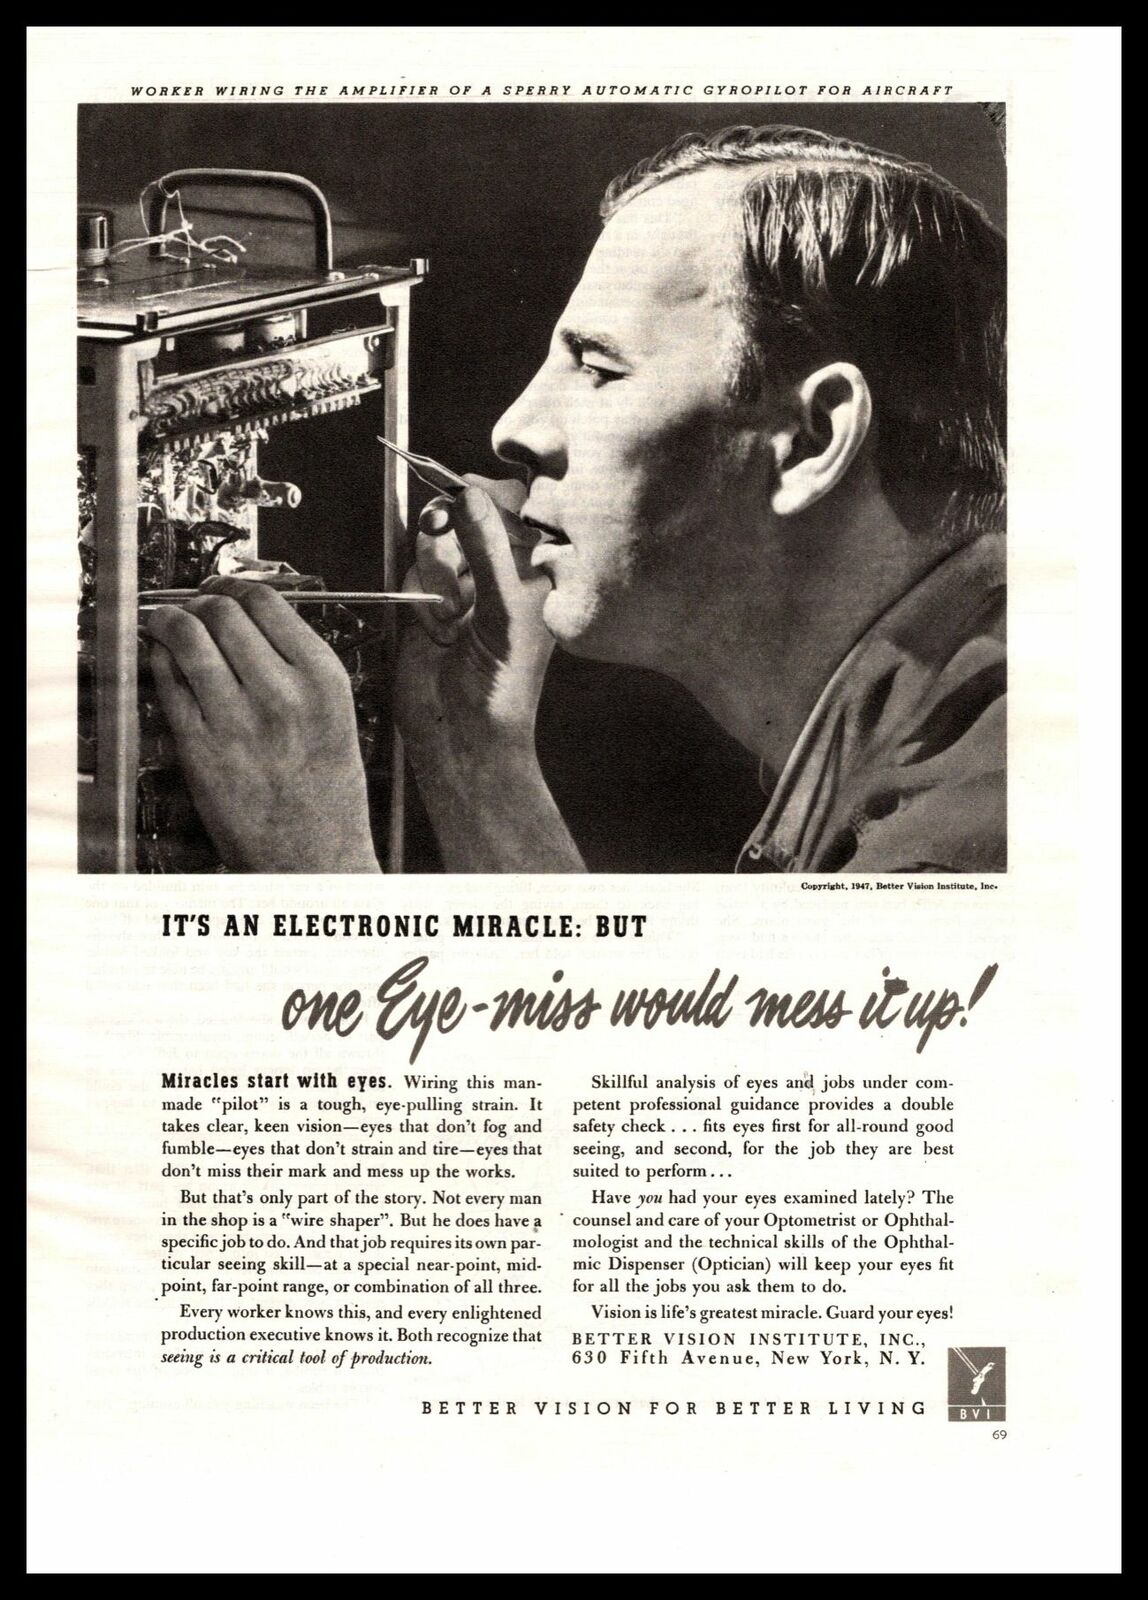 1947 Better Vision Institute Sperry Aircraft Automatic Gyropilot Wiring Print Ad